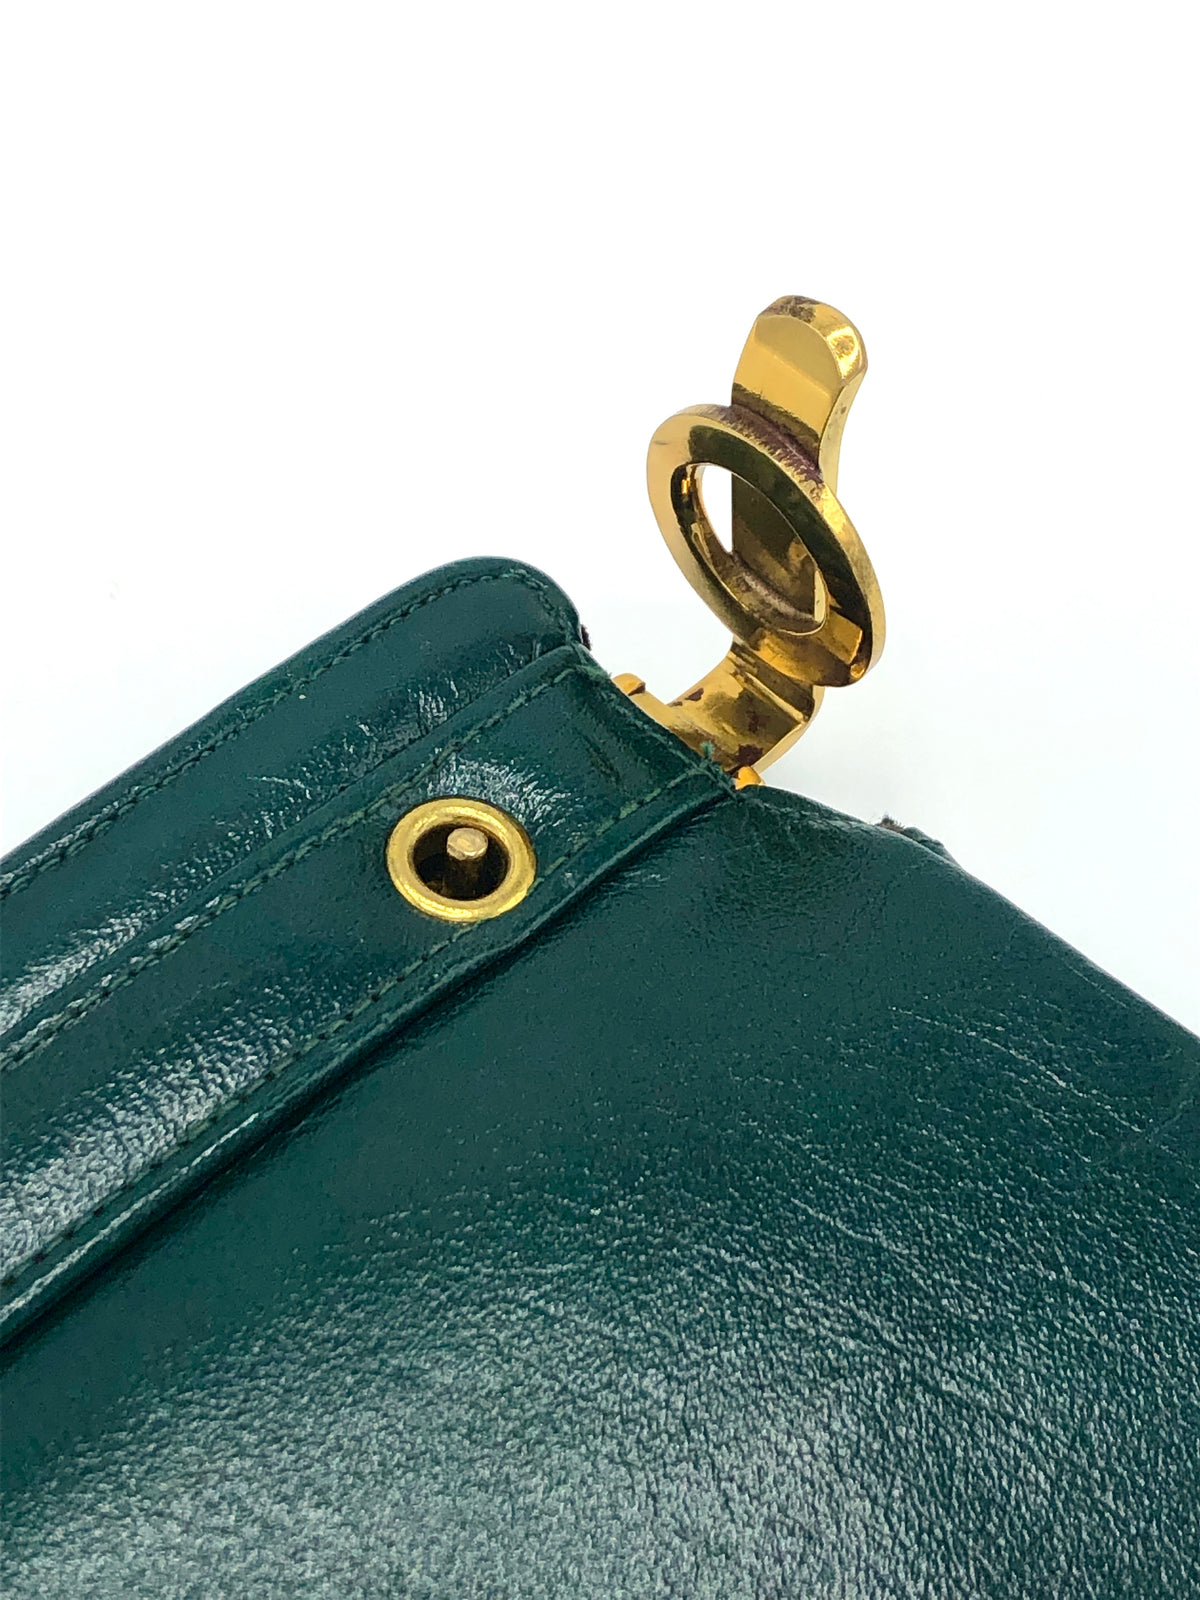 Vintage Green Leather Purse